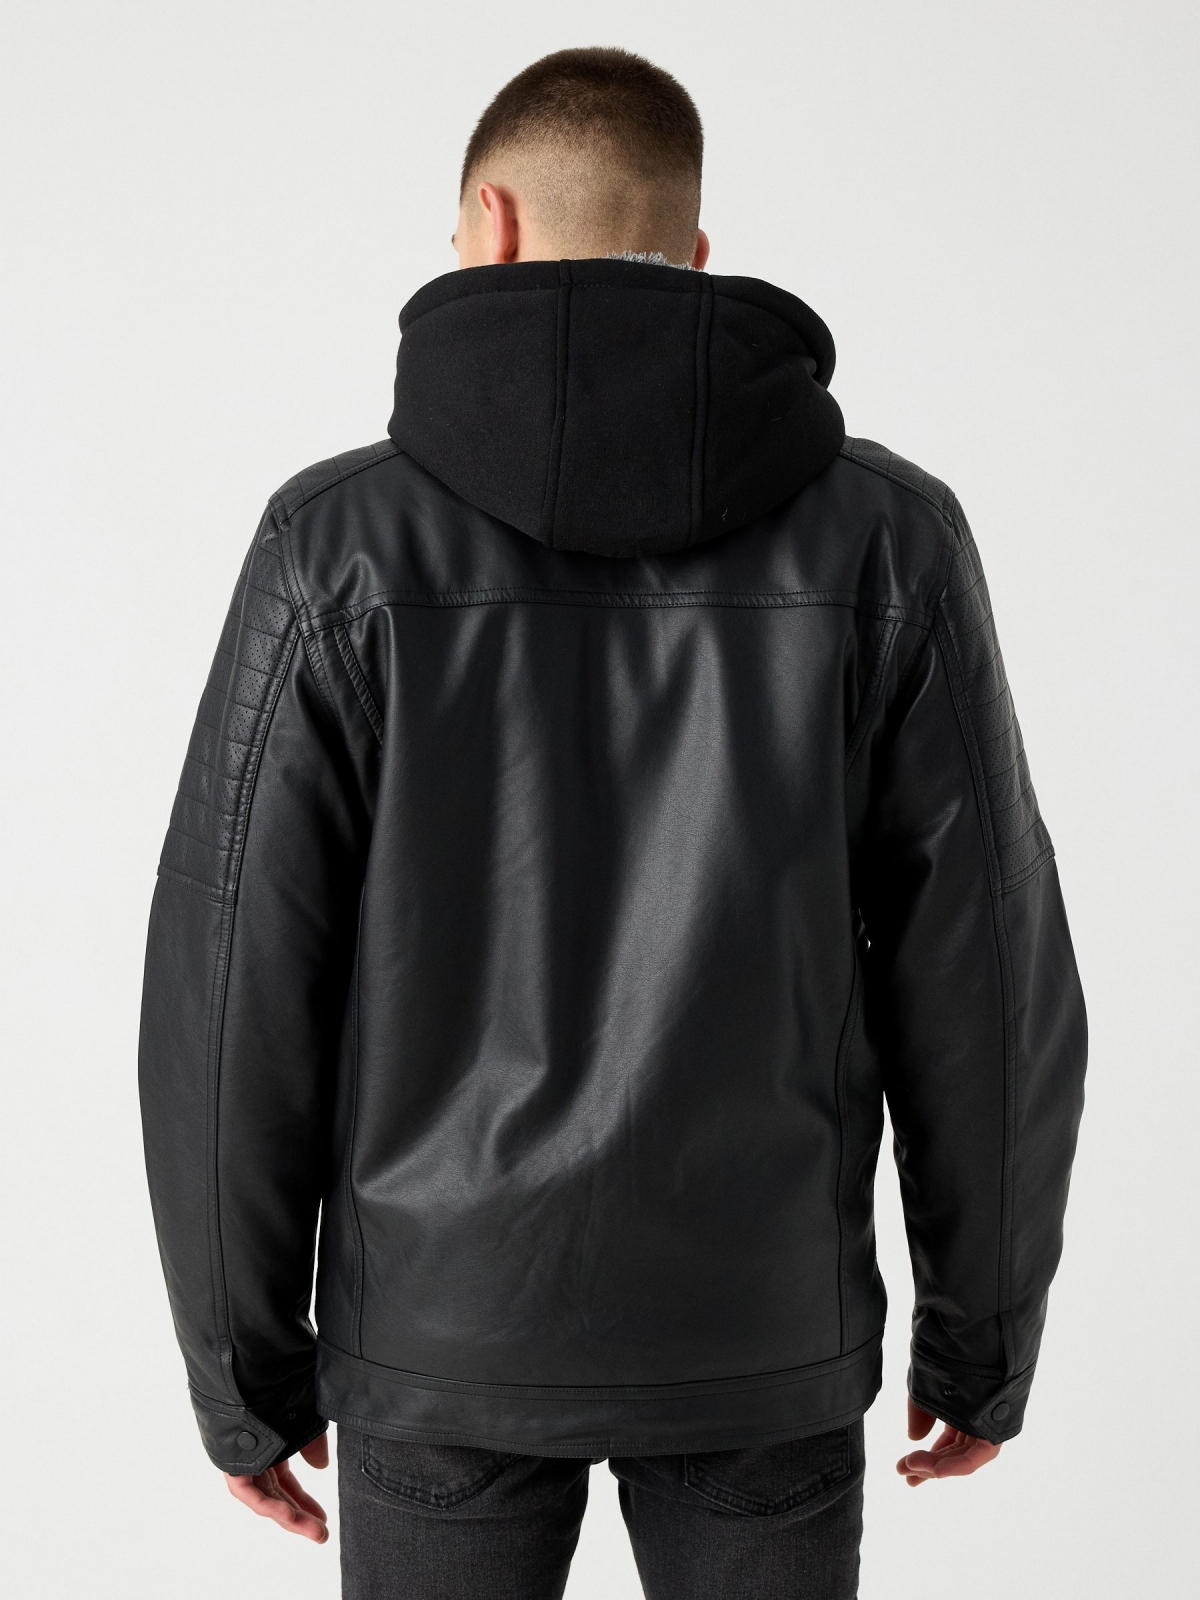 Faux leather jacket with hood black middle back view